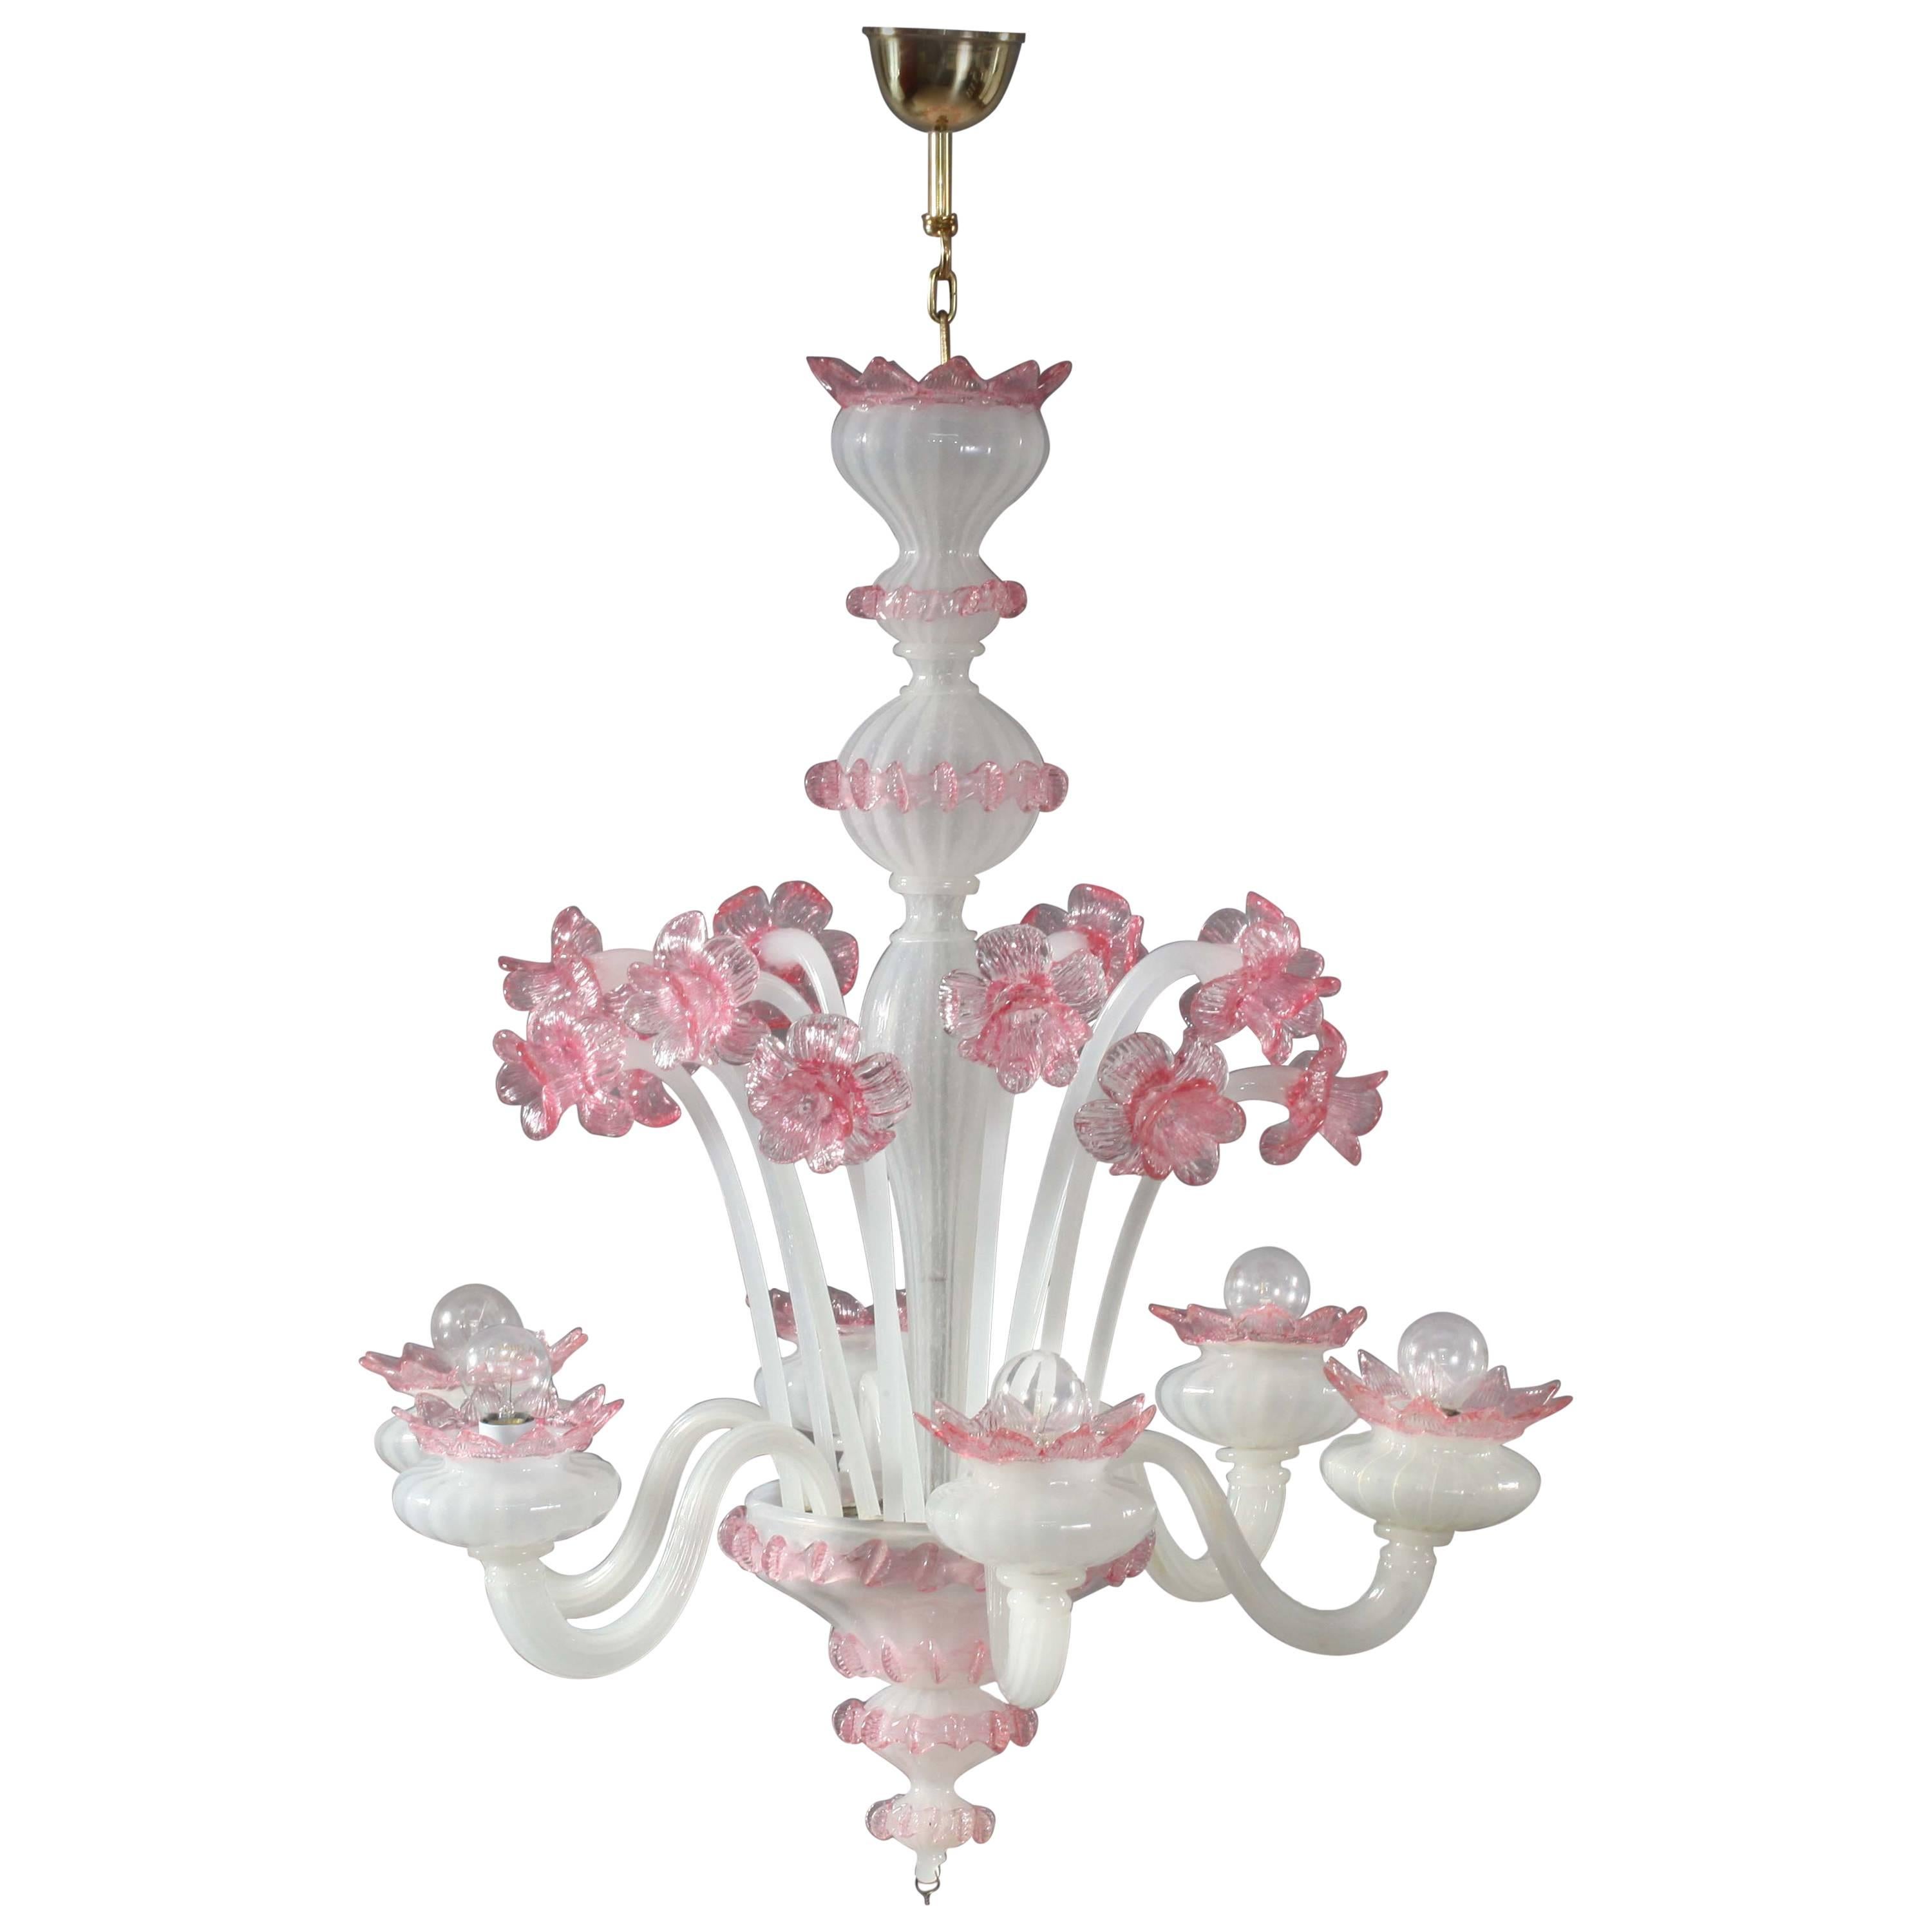 Pink and White Murano Blown Glass Chandelier with Pink Flowers, circa 1940